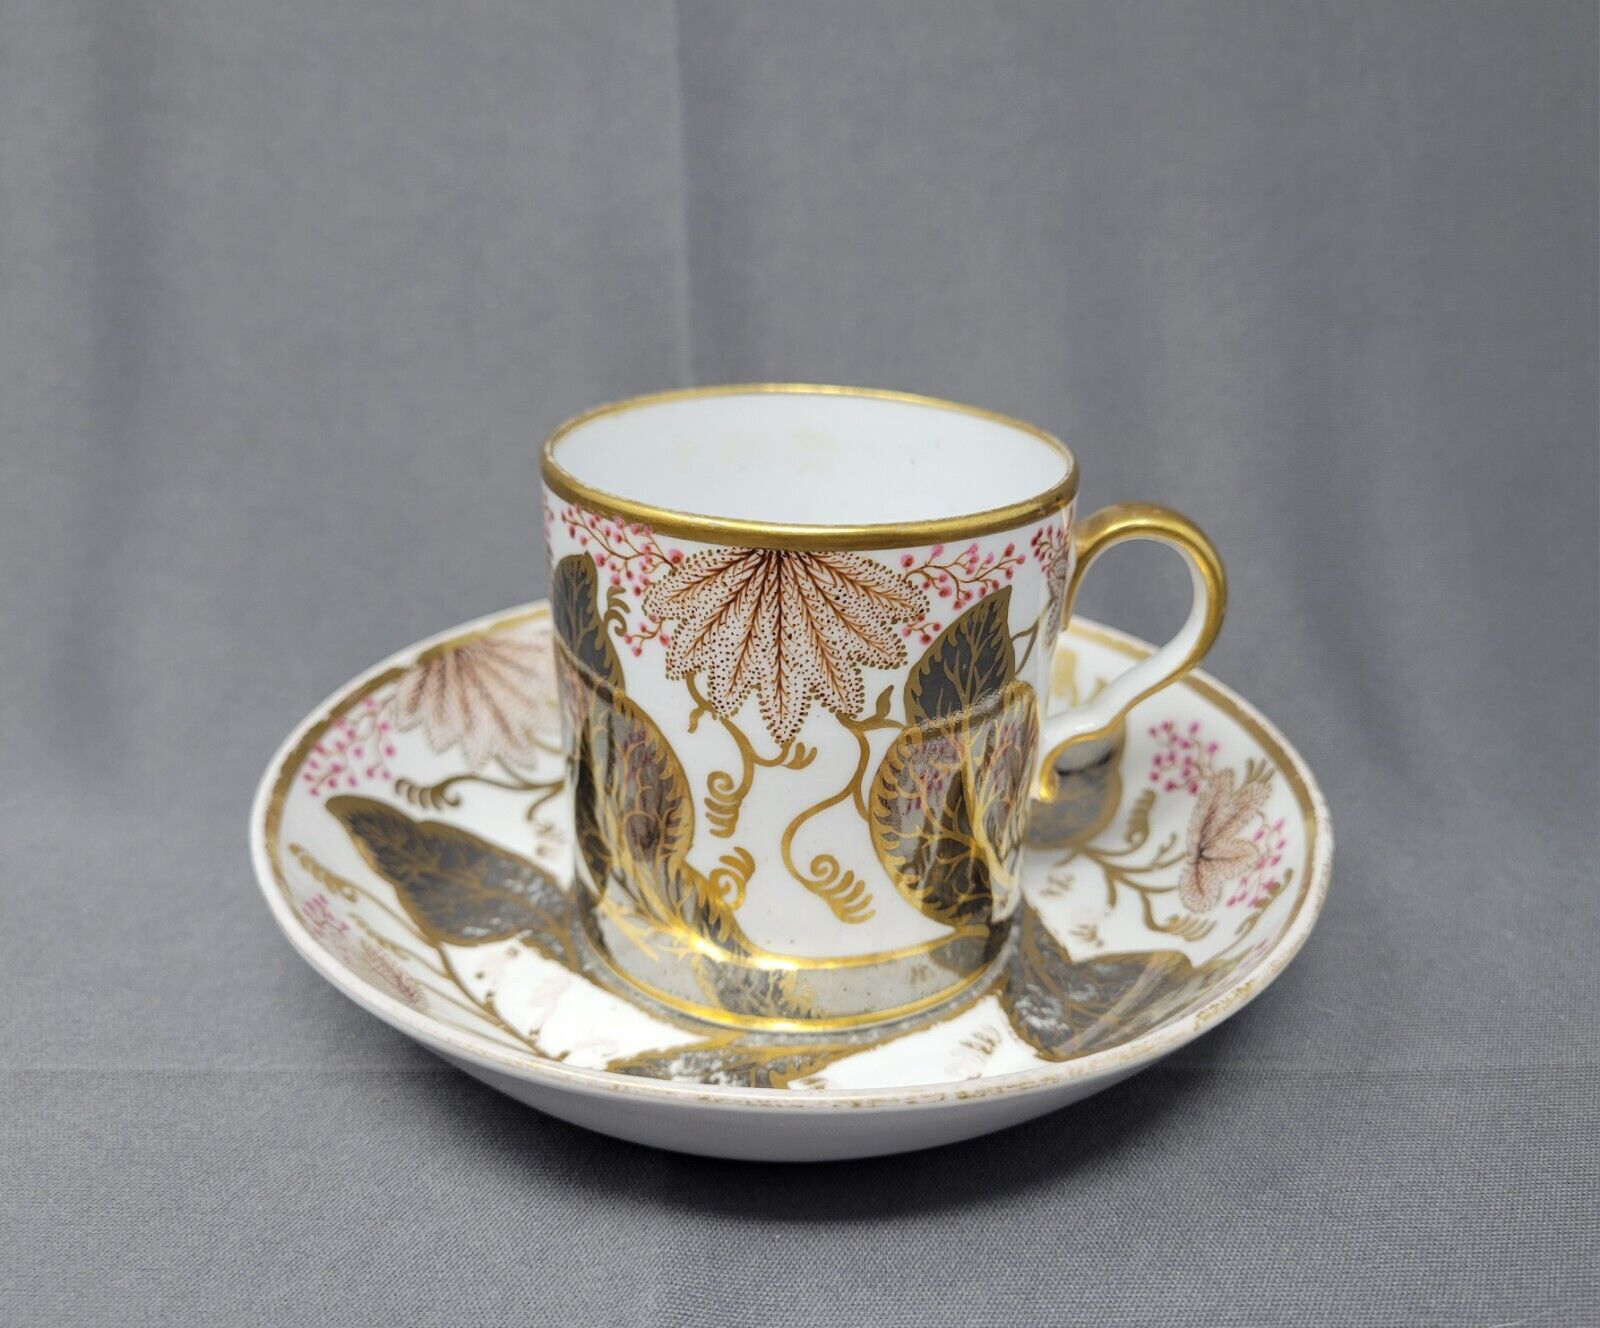 Antique Spode Coffee Can  / Cup & Saucer Porcelain c1810-1820 